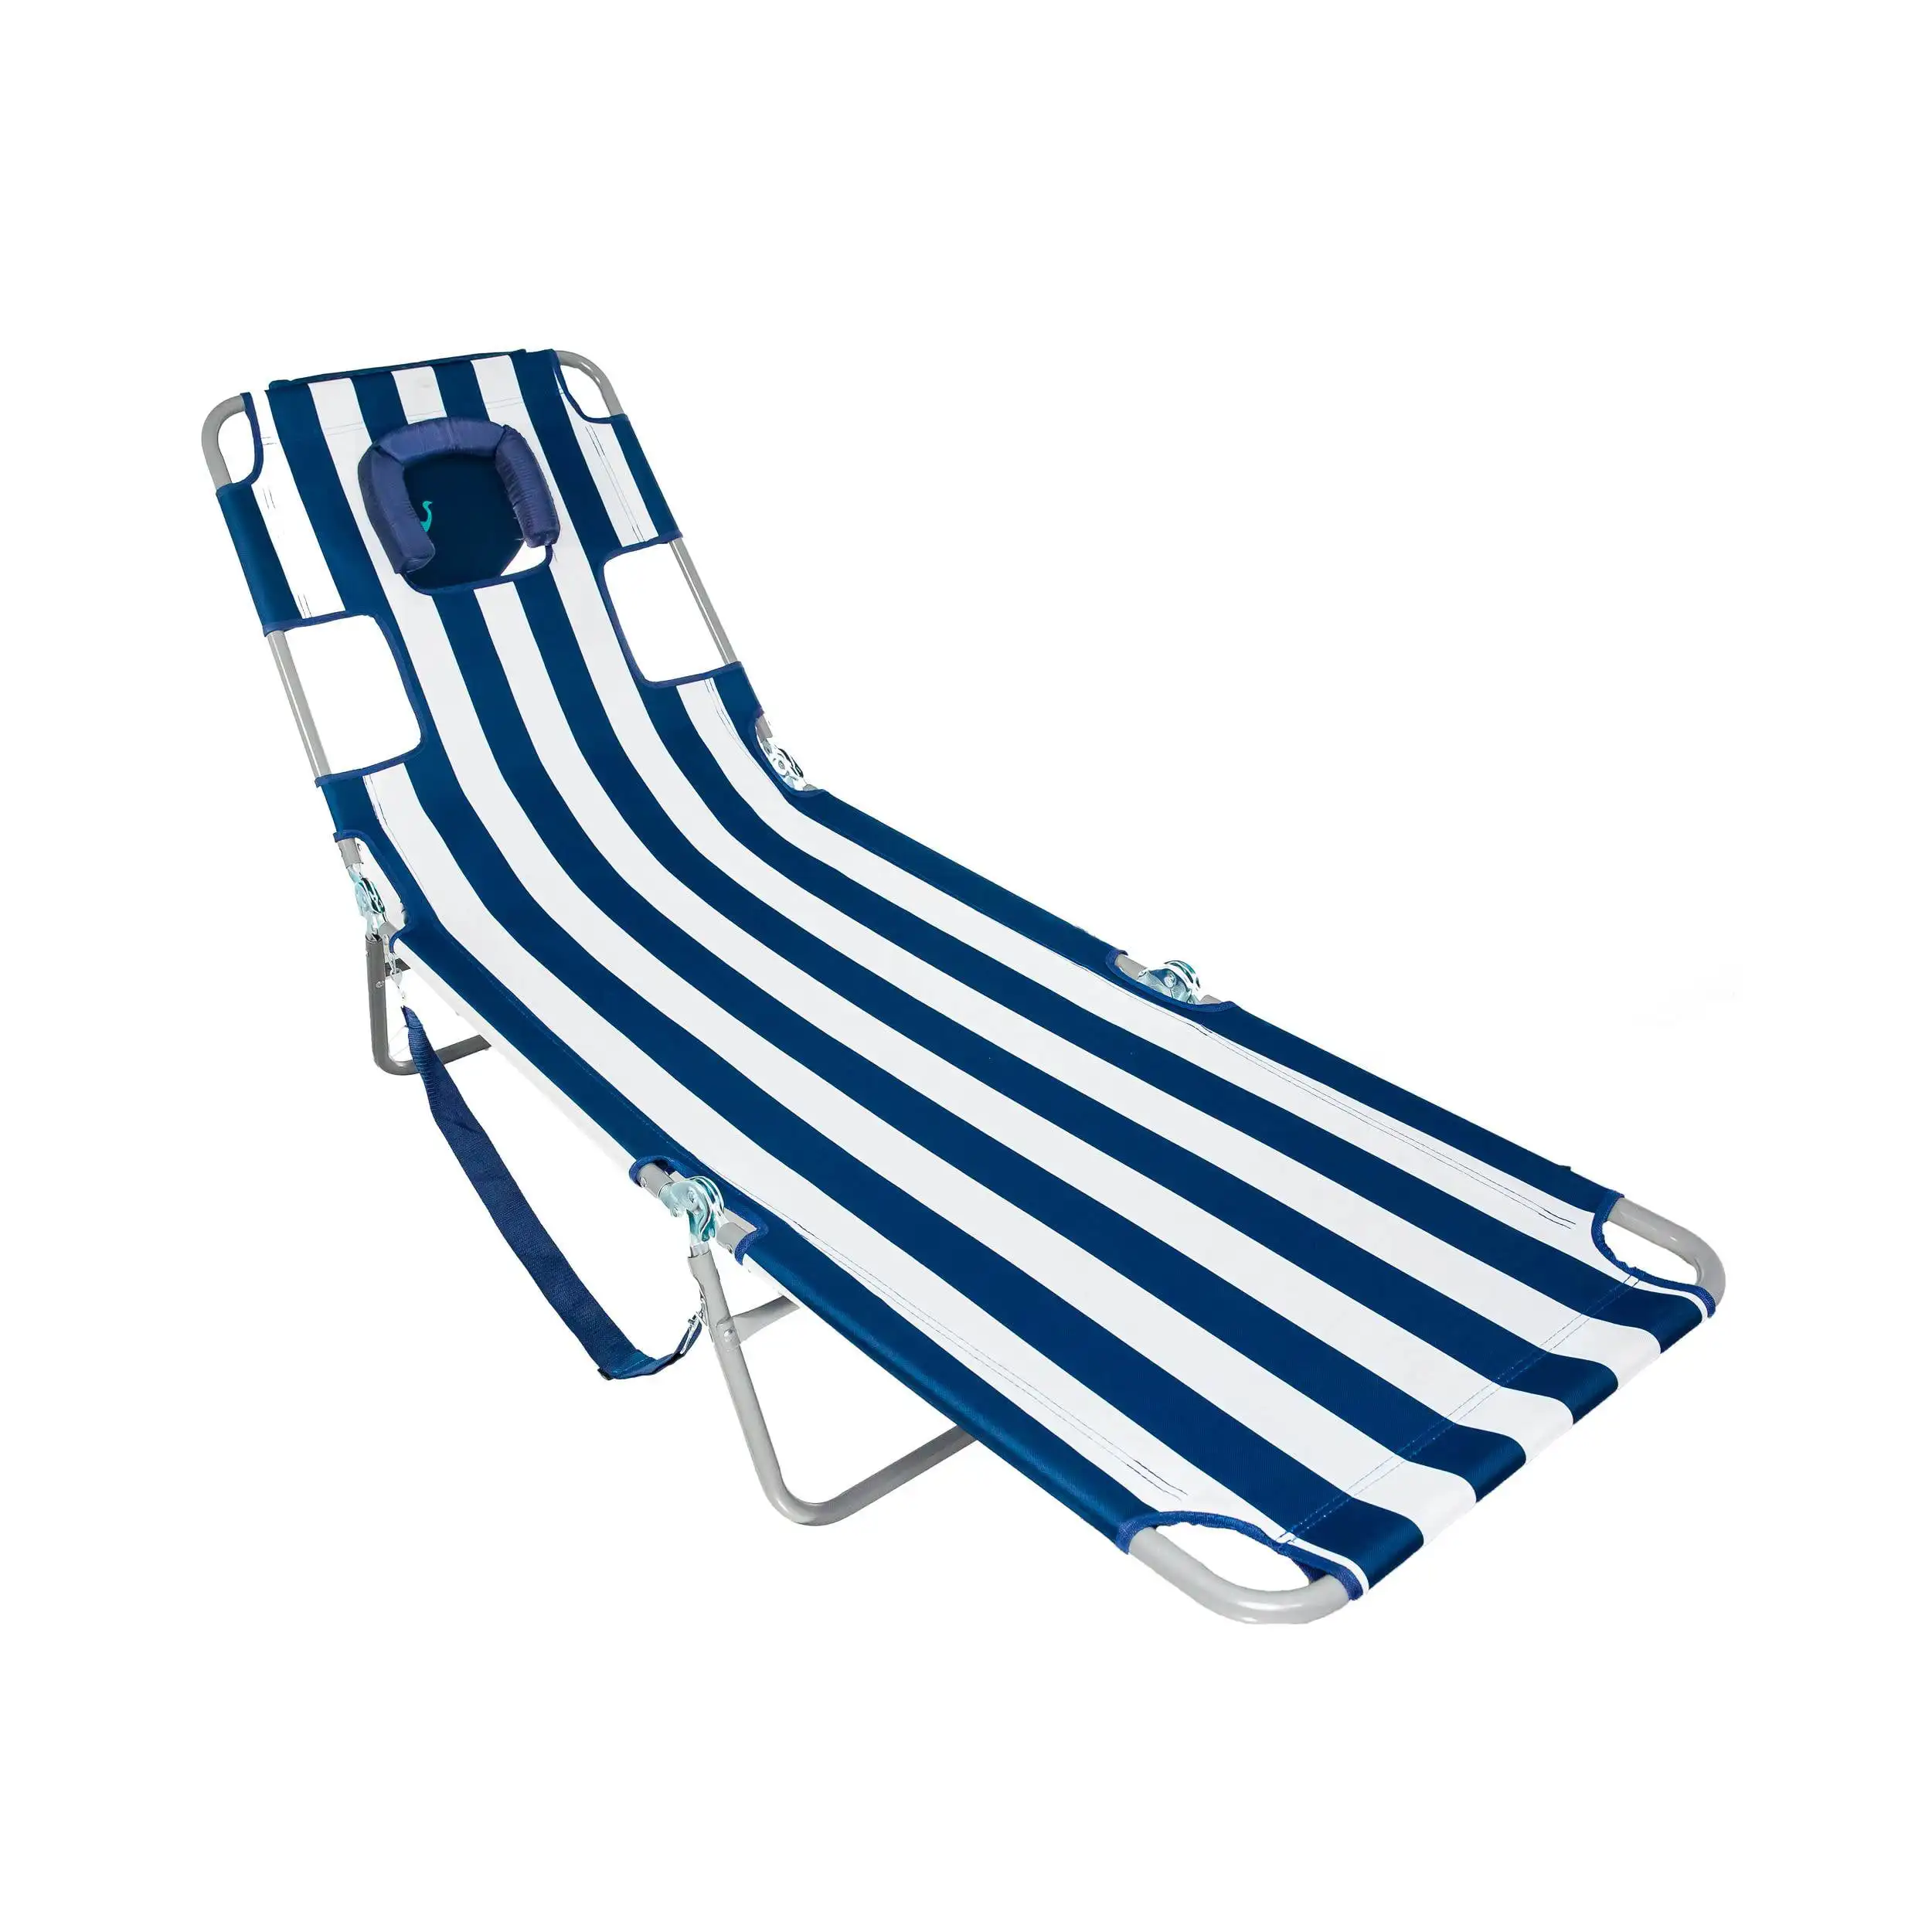 

Ostrich Chaise Lounge Folding Portable Sunbathing Beach Chair, Navy Stripes, Polyester, Steel, (Blue, Multicolor, White)